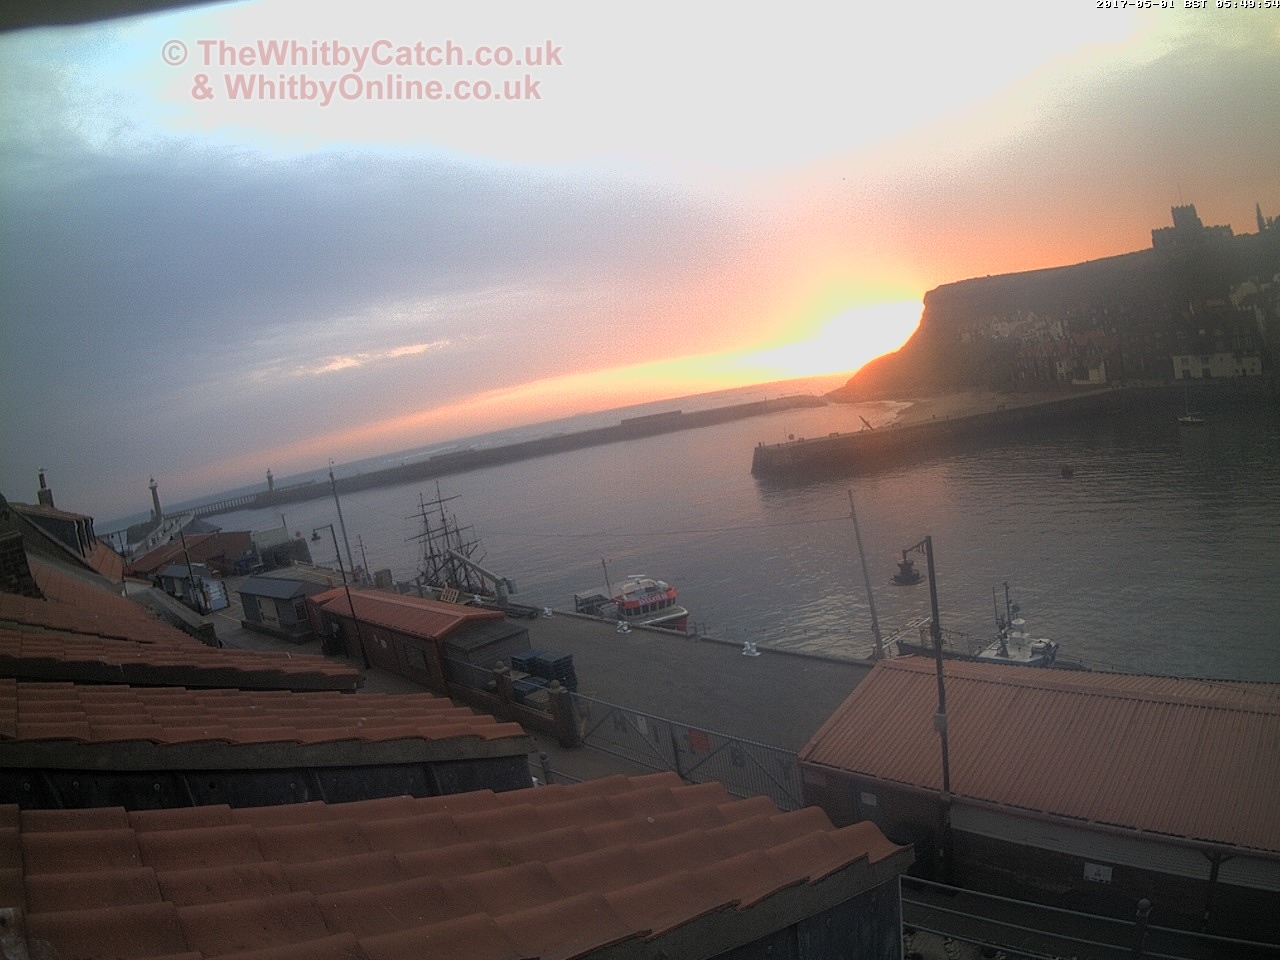 Whitby Mon 1st May 2017 05:50.